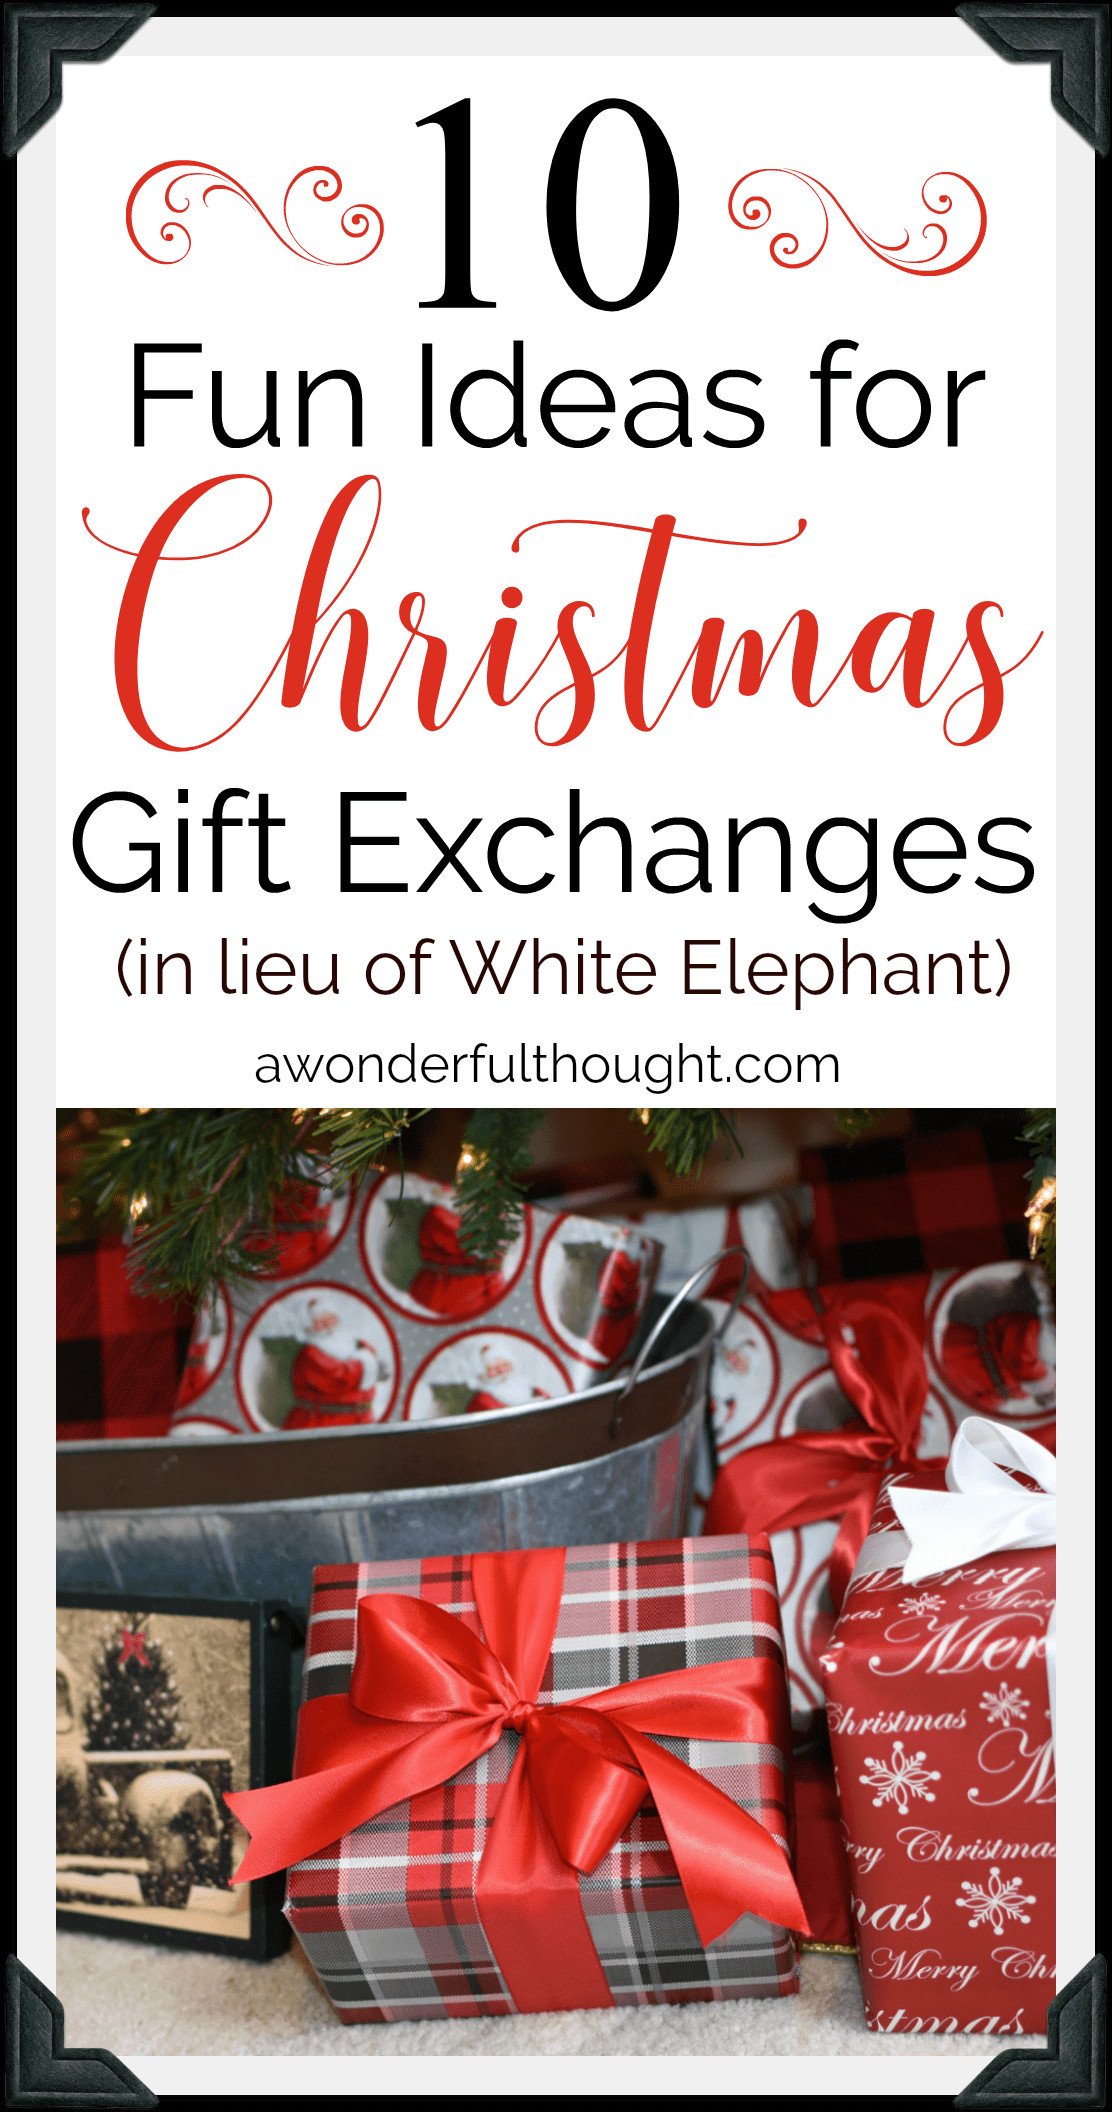 Holiday Gift Exchange Games Ideas
 Christmas Gift Exchange Ideas A Wonderful Thought